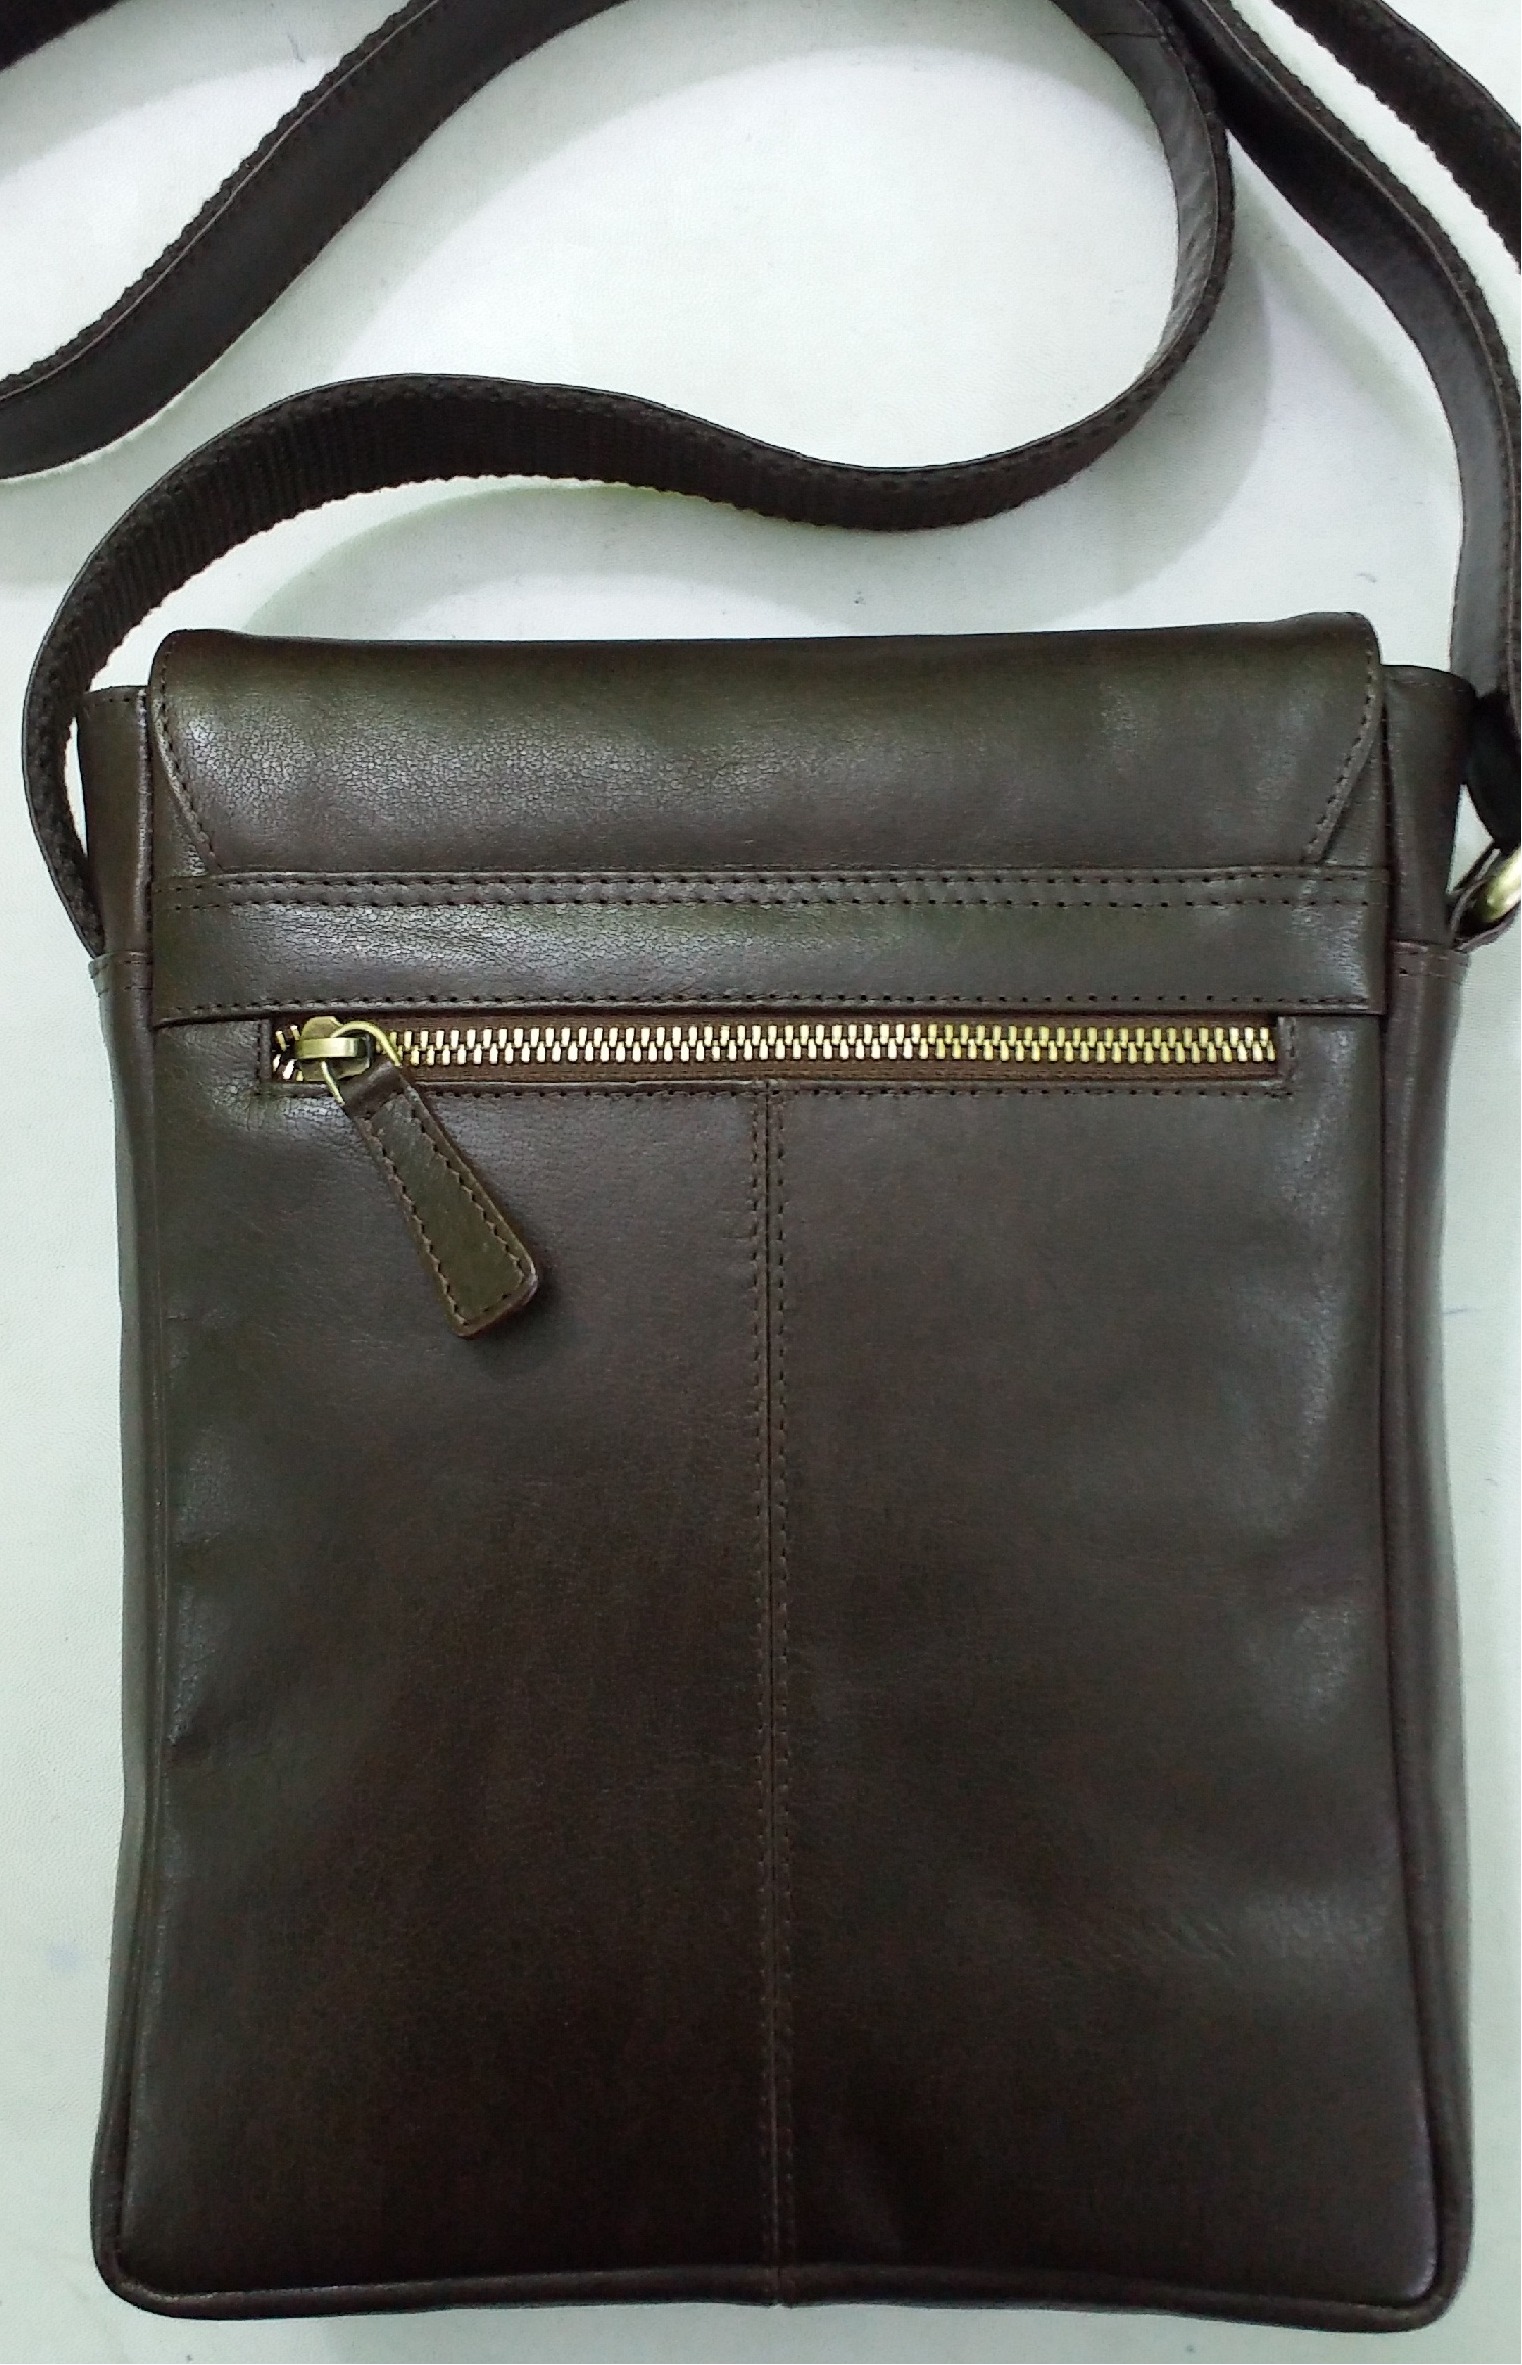 Leather Cross Body Bags